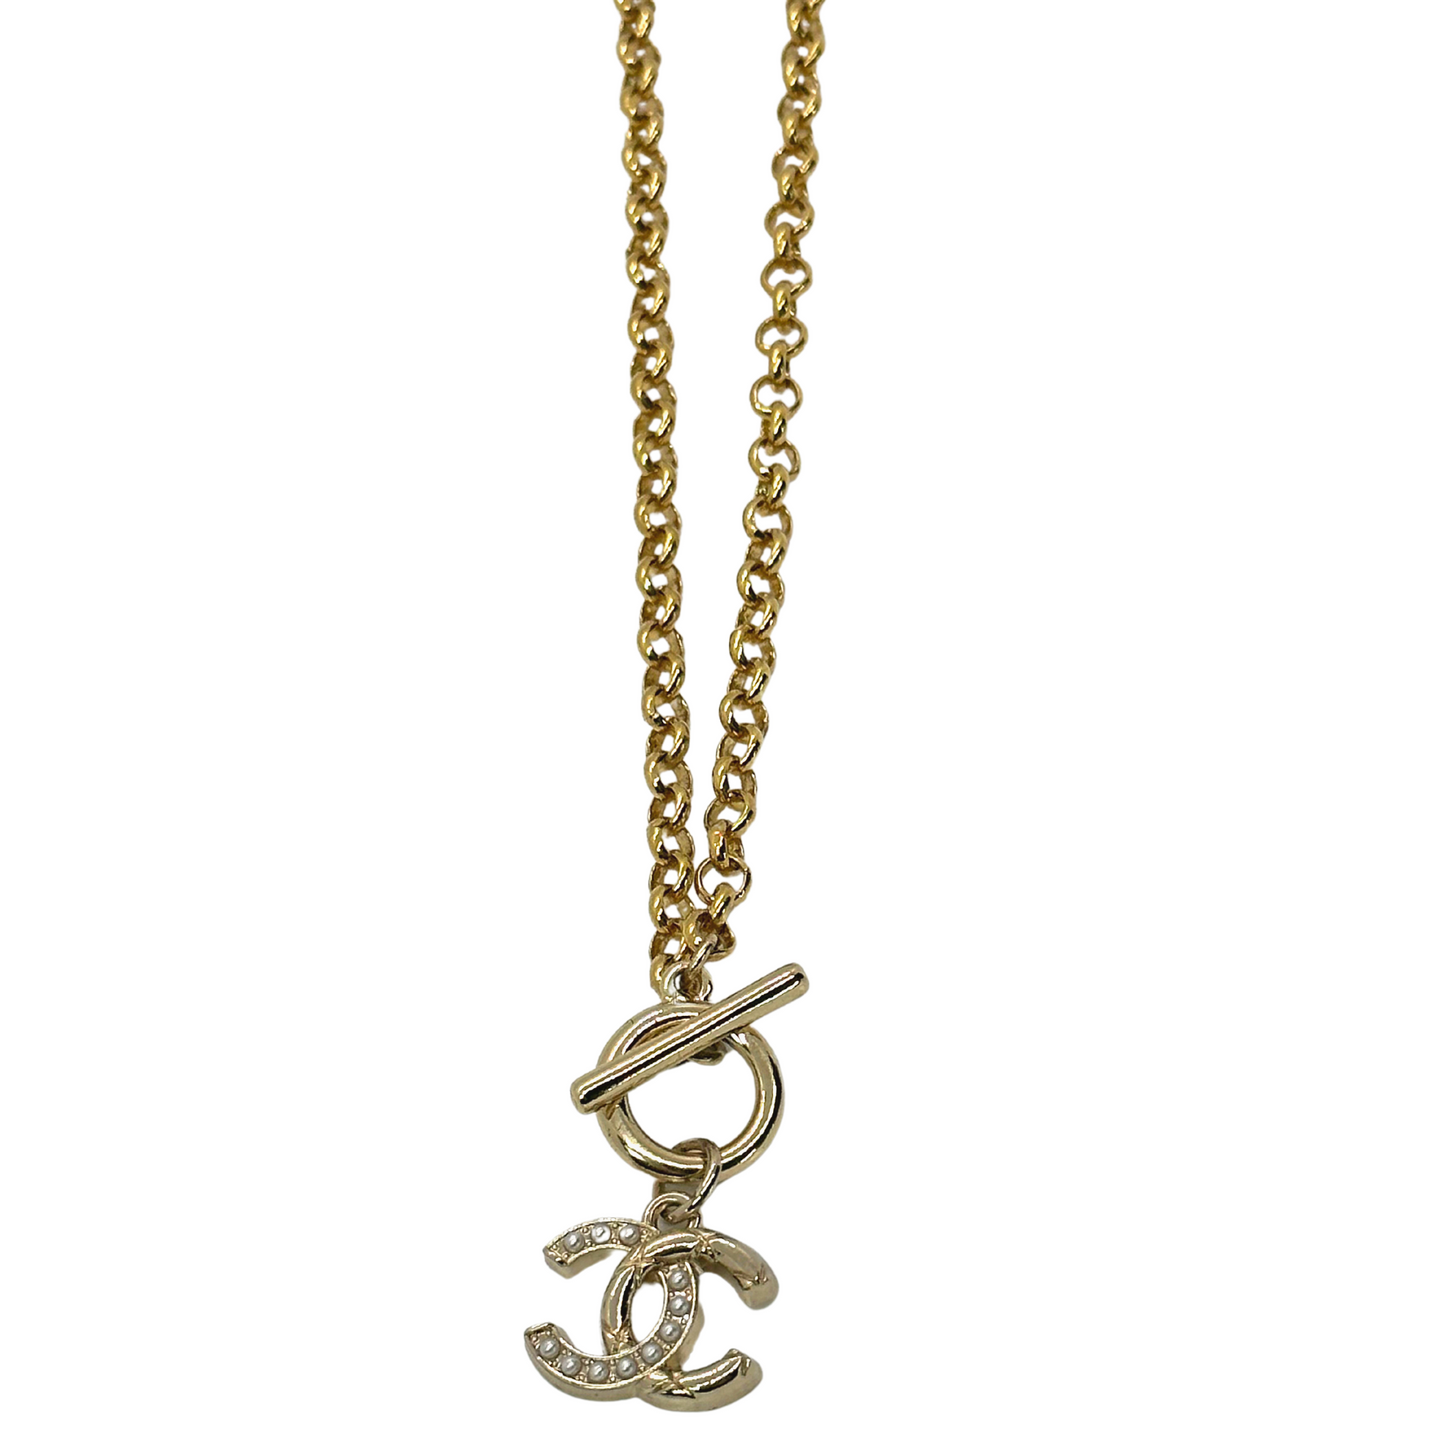 Authentic Chanel Half Faux Pearl Pendant | Reworked Gold 16" Necklace